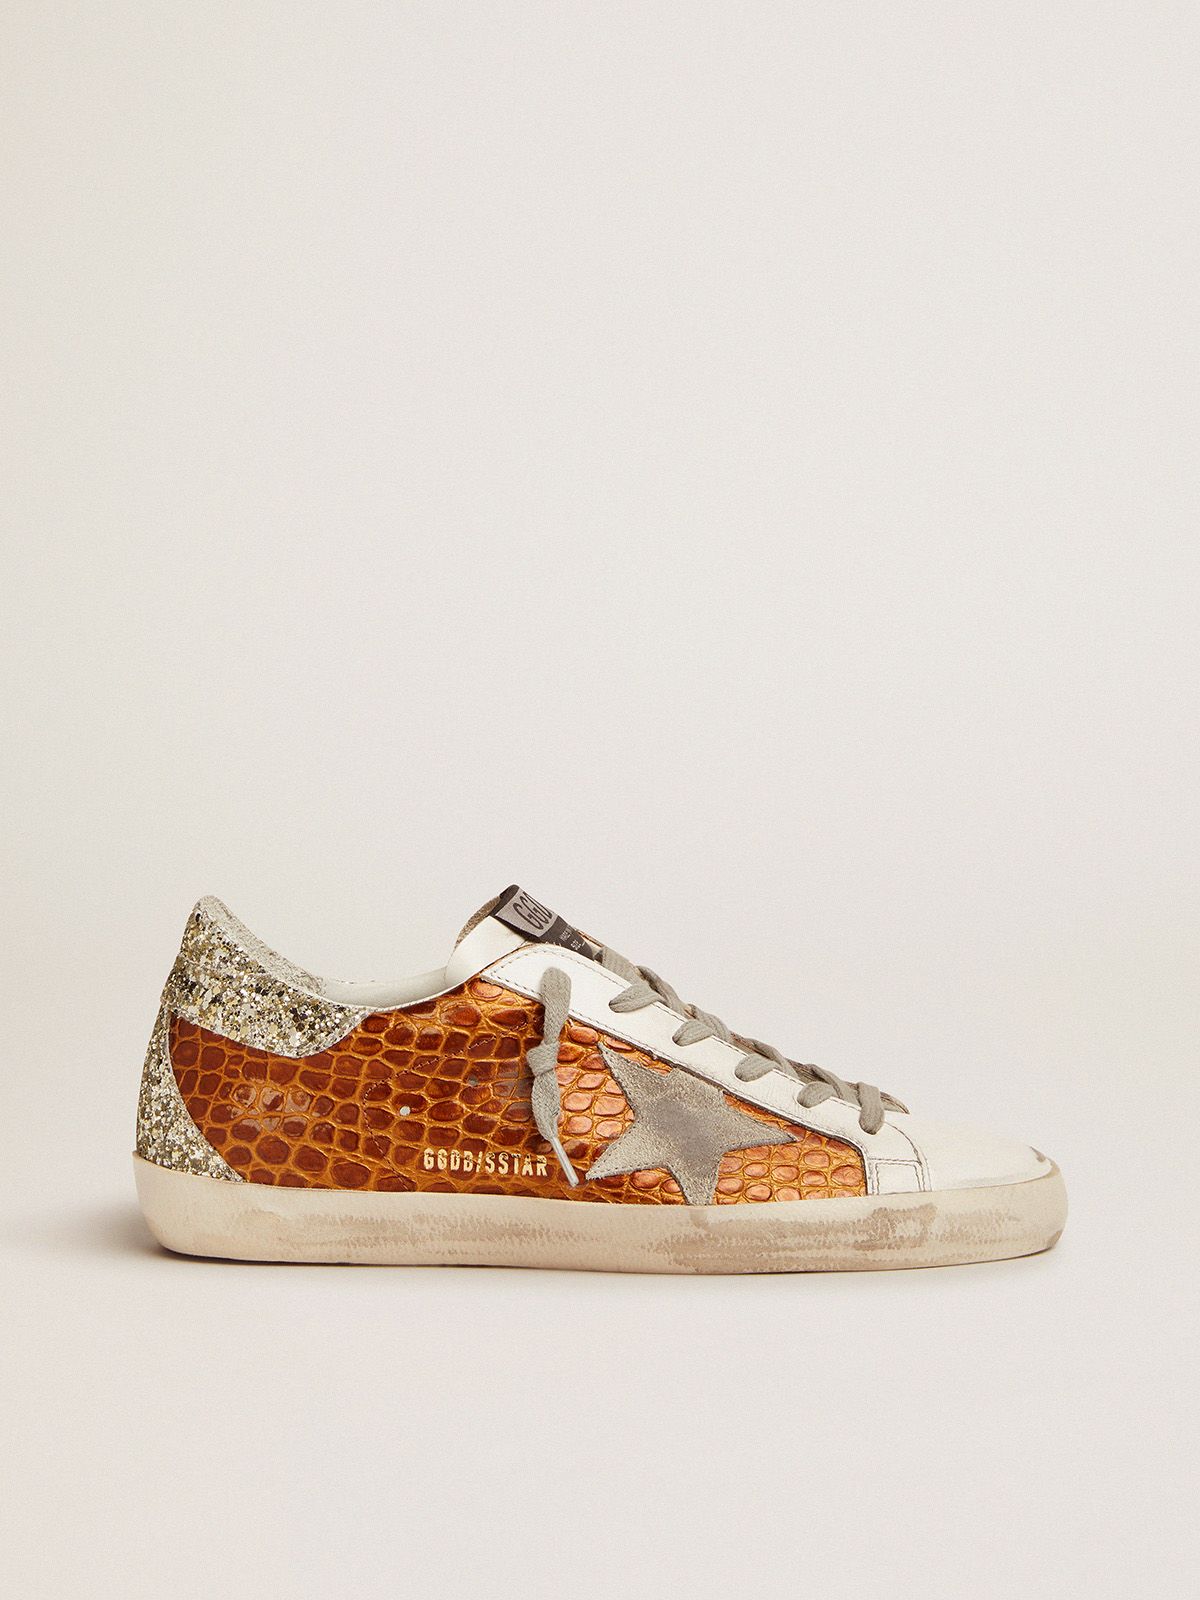 Super-Star sneakers in brown crocodile-print leather with light green glitter | 